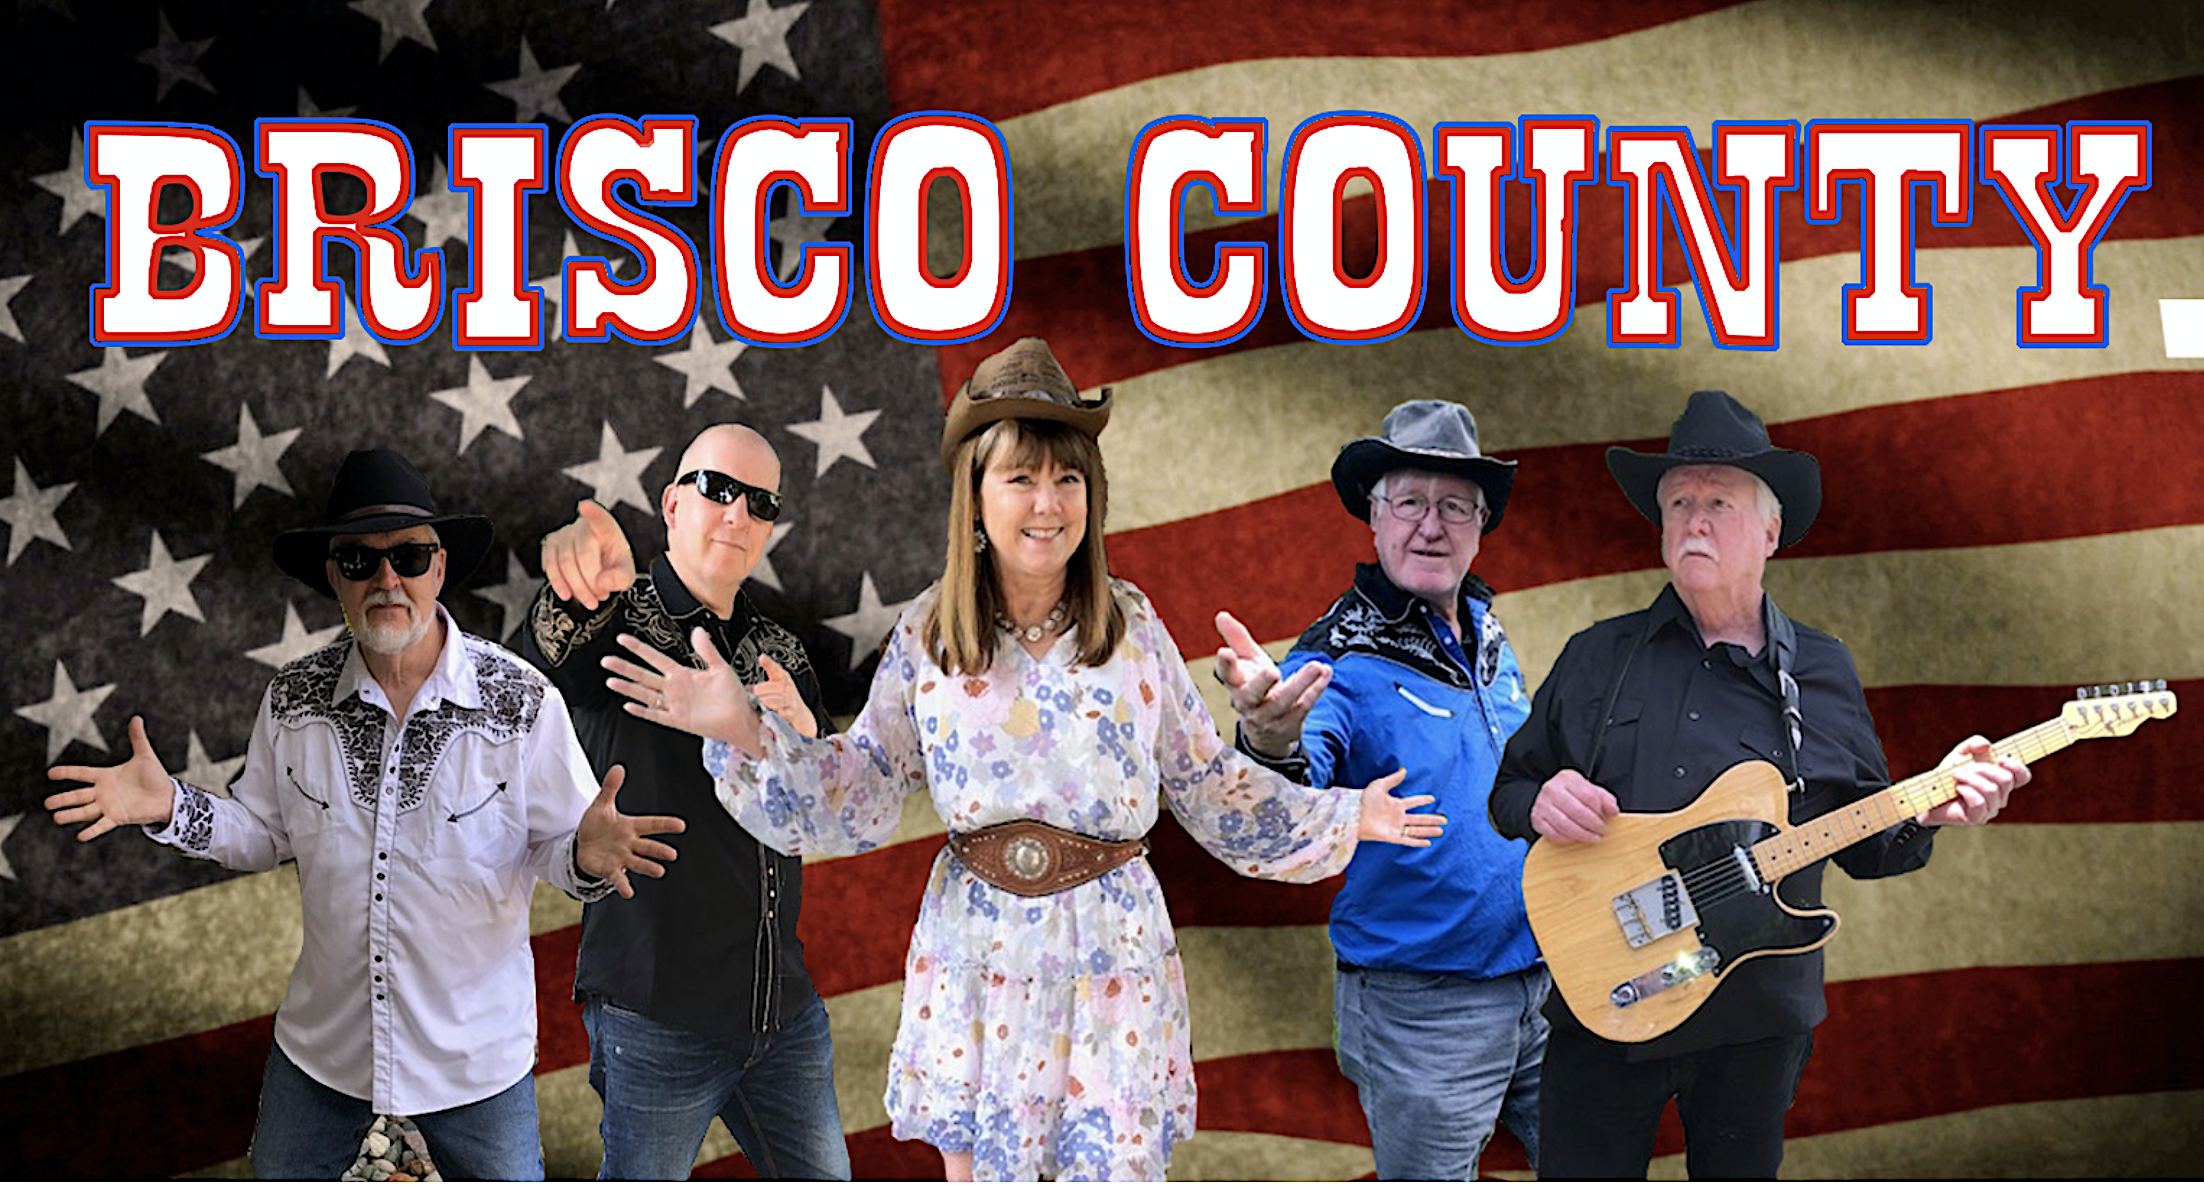 Brisco County brings its country sound to Lions Park Friday night